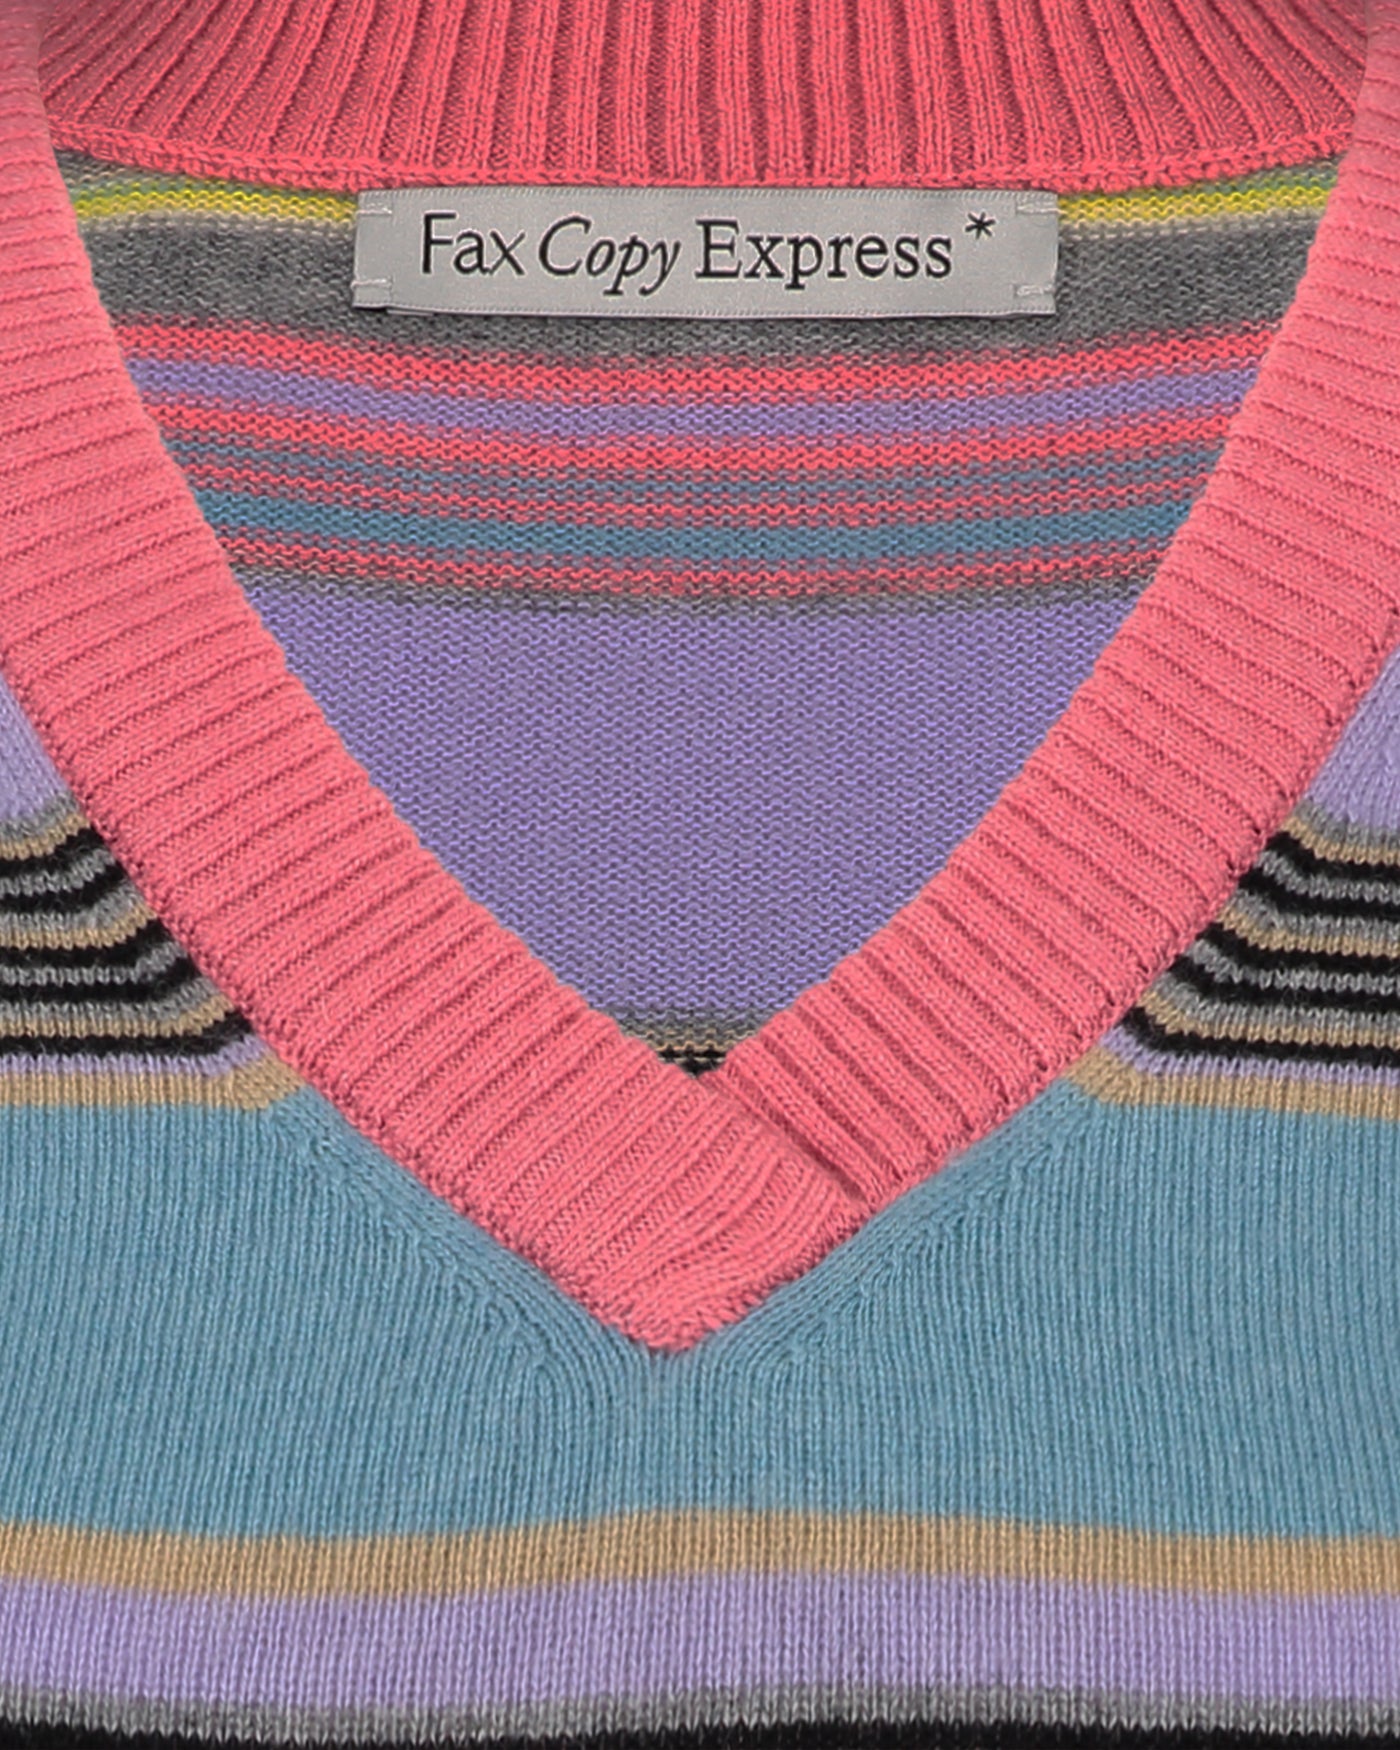 Pink Stripes Casual Thin Wool Vest